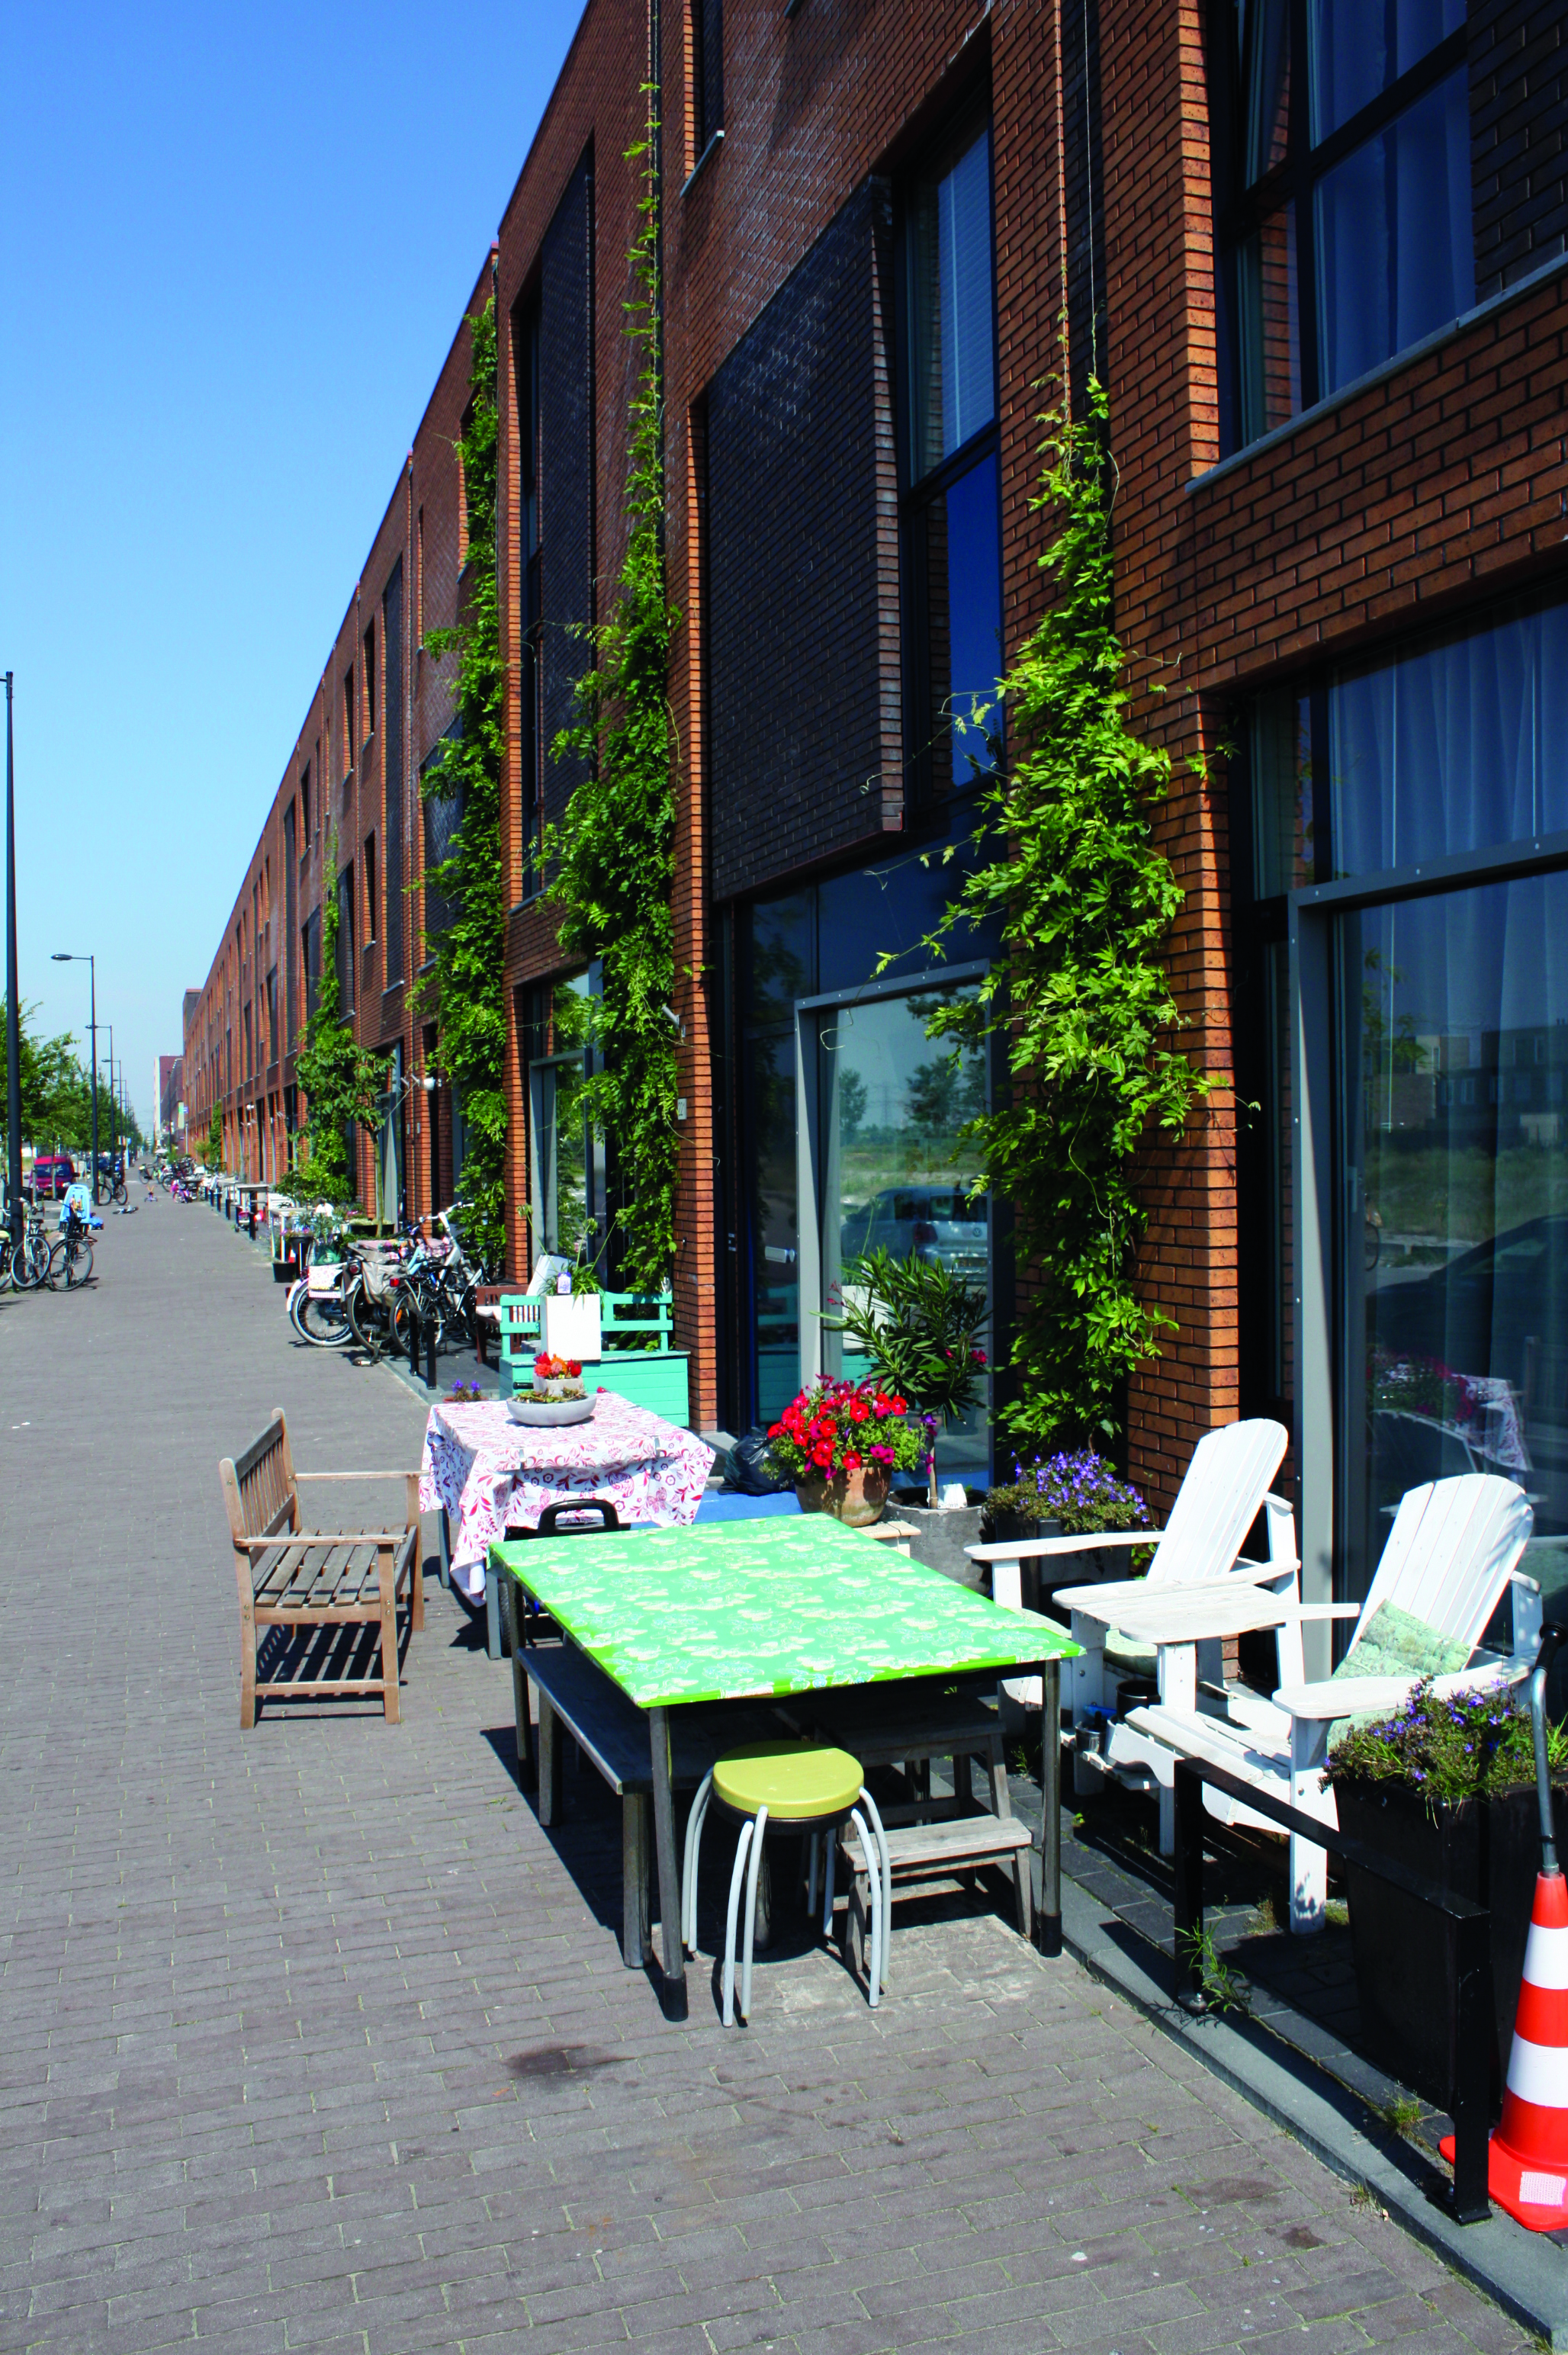 Hybrid Zones Make Streets Personal The City At Eye Level